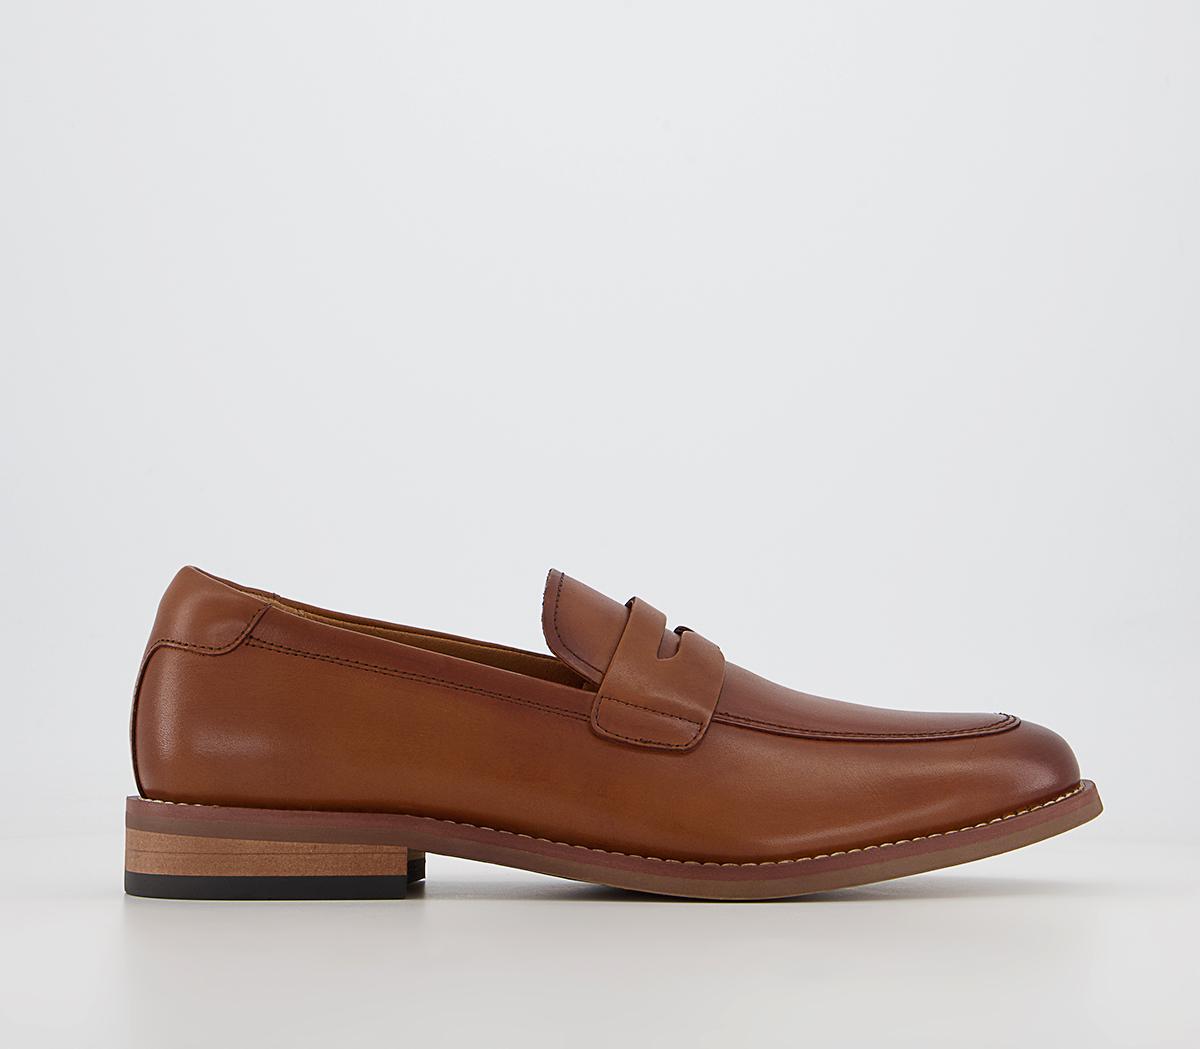 OFFICEMedway Contrast Sole LoafersTan Leather